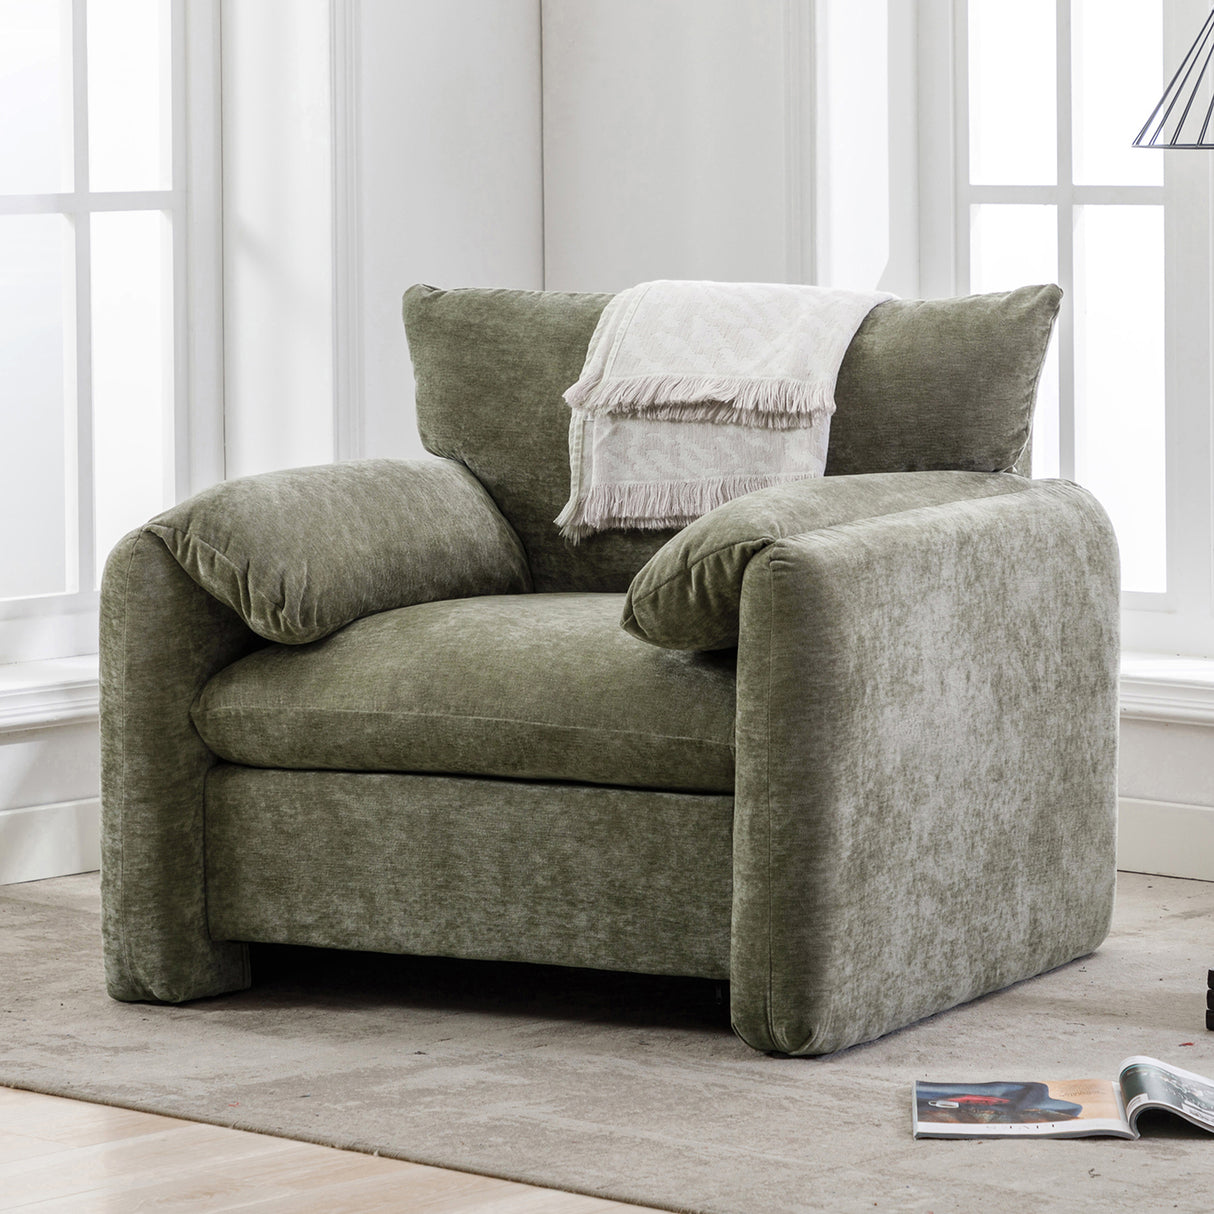 Modern Style Chenille Oversized Armchair Accent Chair Single Sofa Lounge Chair 38.6'' W for Living Room, Bedroom, Matcha Green - Home Elegance USA